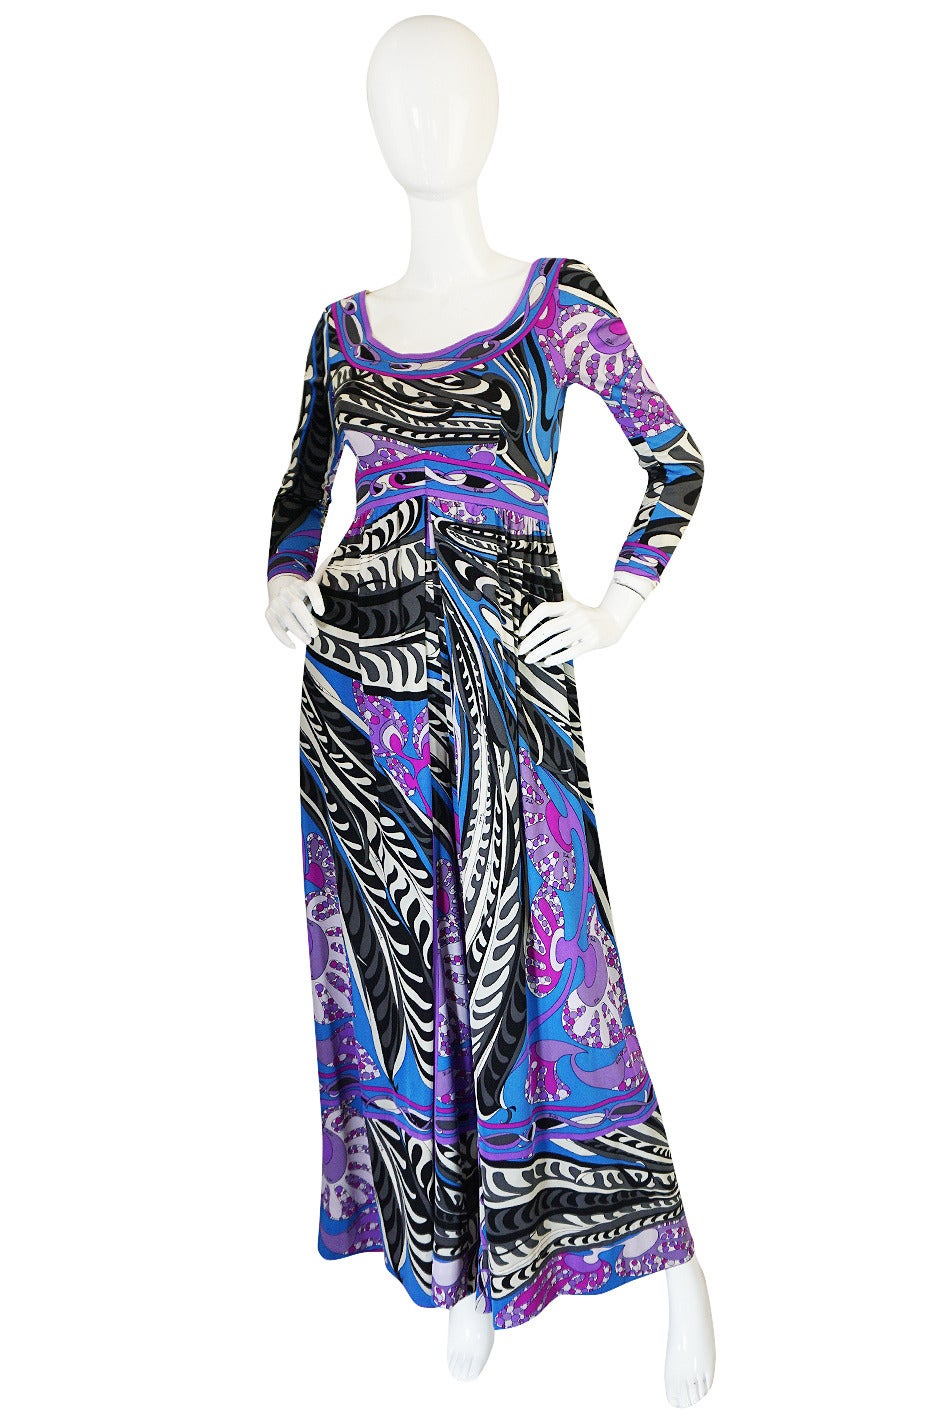 Some pieces still have the ability to make me catch my breathe with a first see them and this Pucci silk jersey jumpsuit is one that did. It is an absolutely gorgeous Pucci piece with a bold and classic Pucci color palette in purples, pinks and